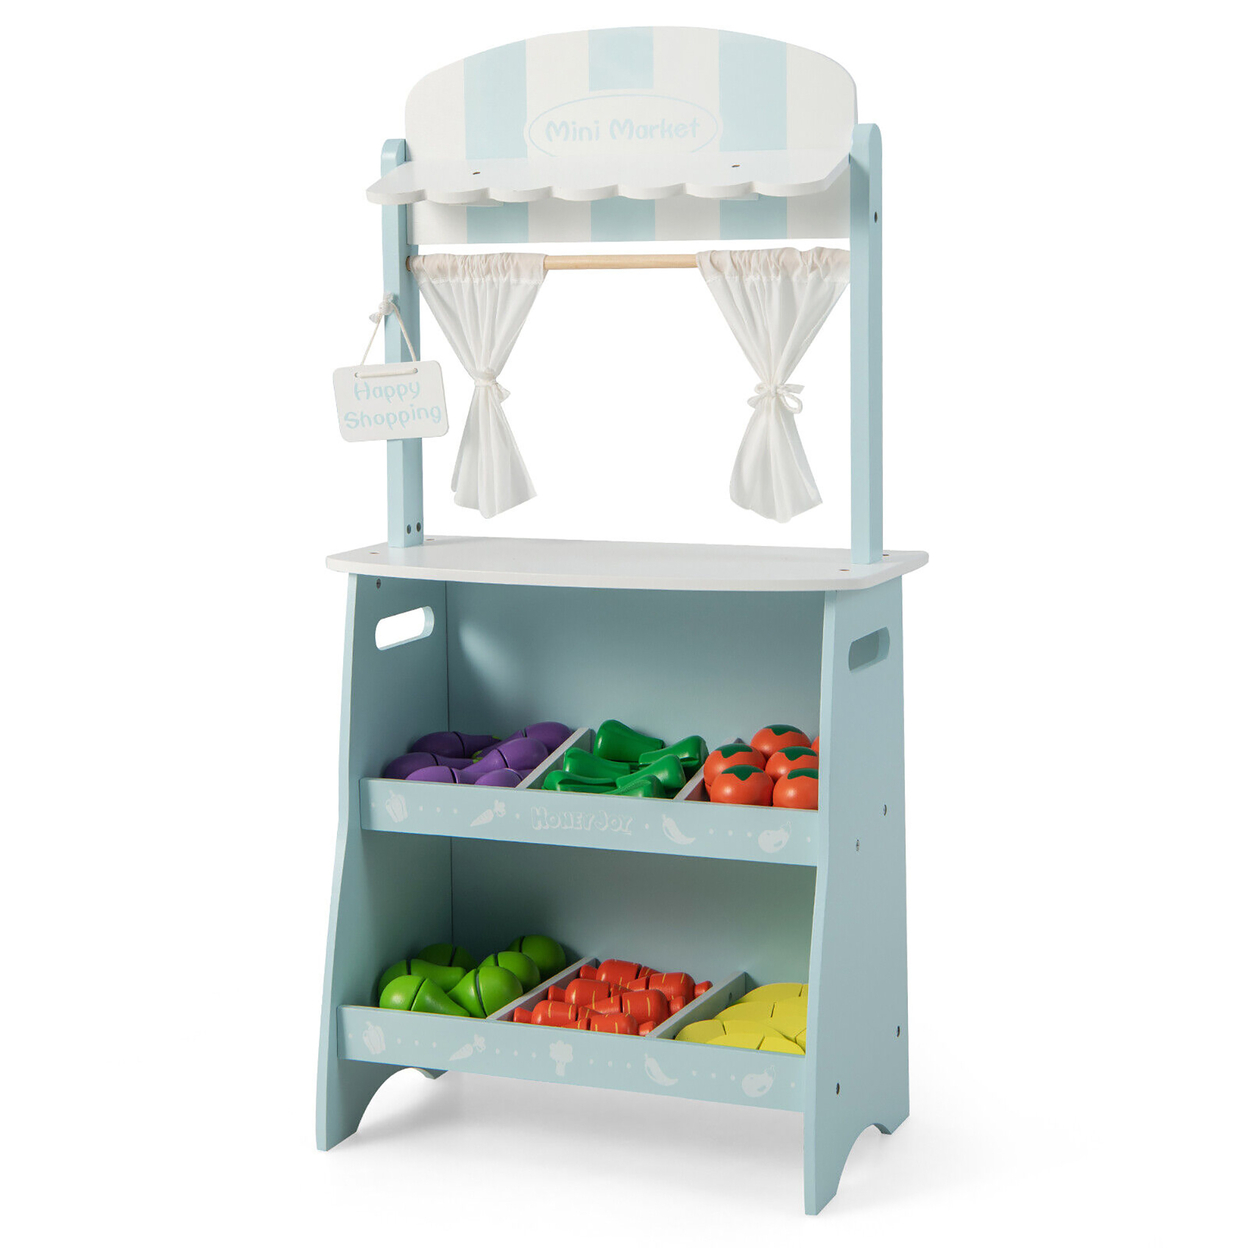 Kid's Farmers Market Stand Wooden Grocery Store Set W/ Cutting Veggies & Fruits - Blue